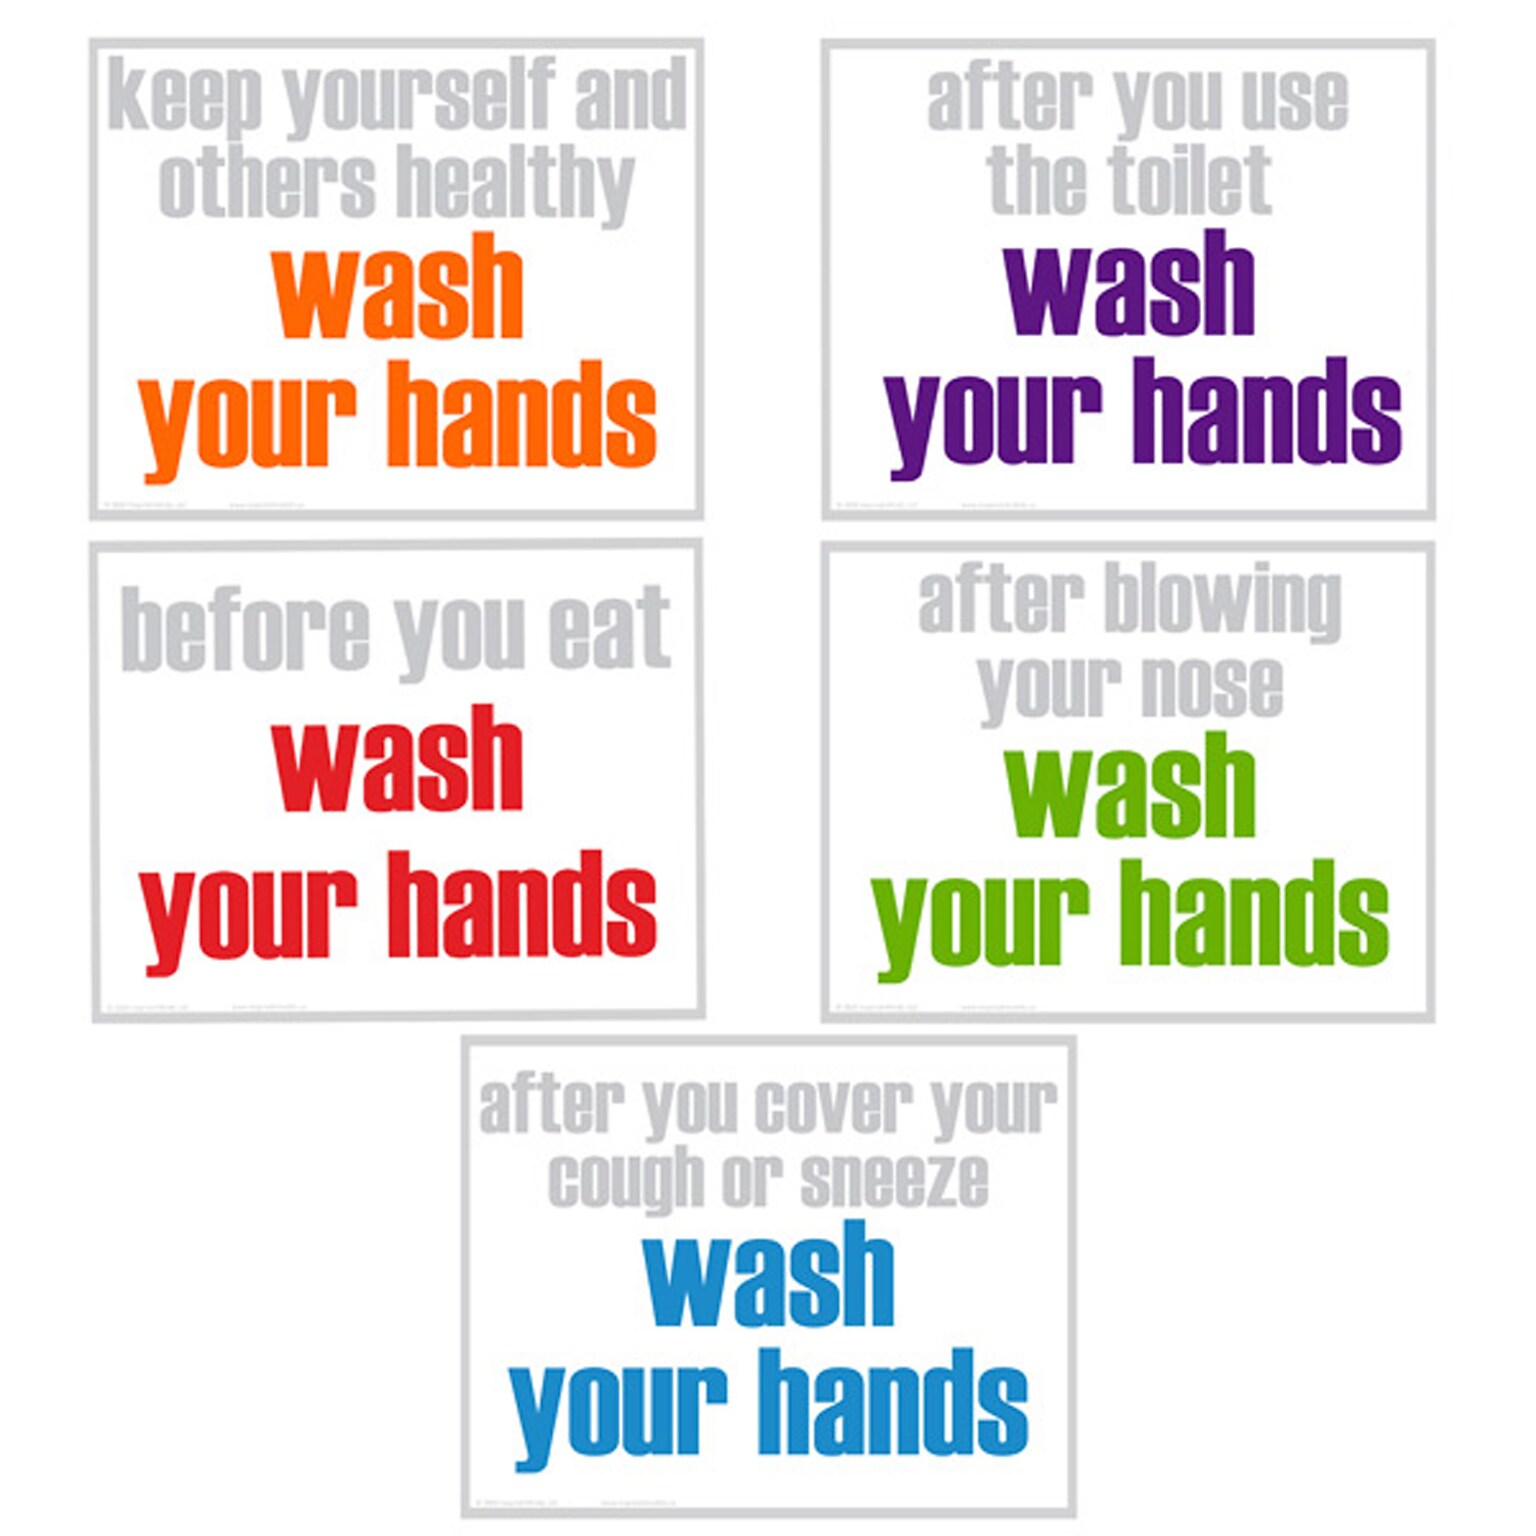 INSPIRED MINDS 11 x 14 Wash Your Hands Posters, Set of 5 (ISMIMHS51P)